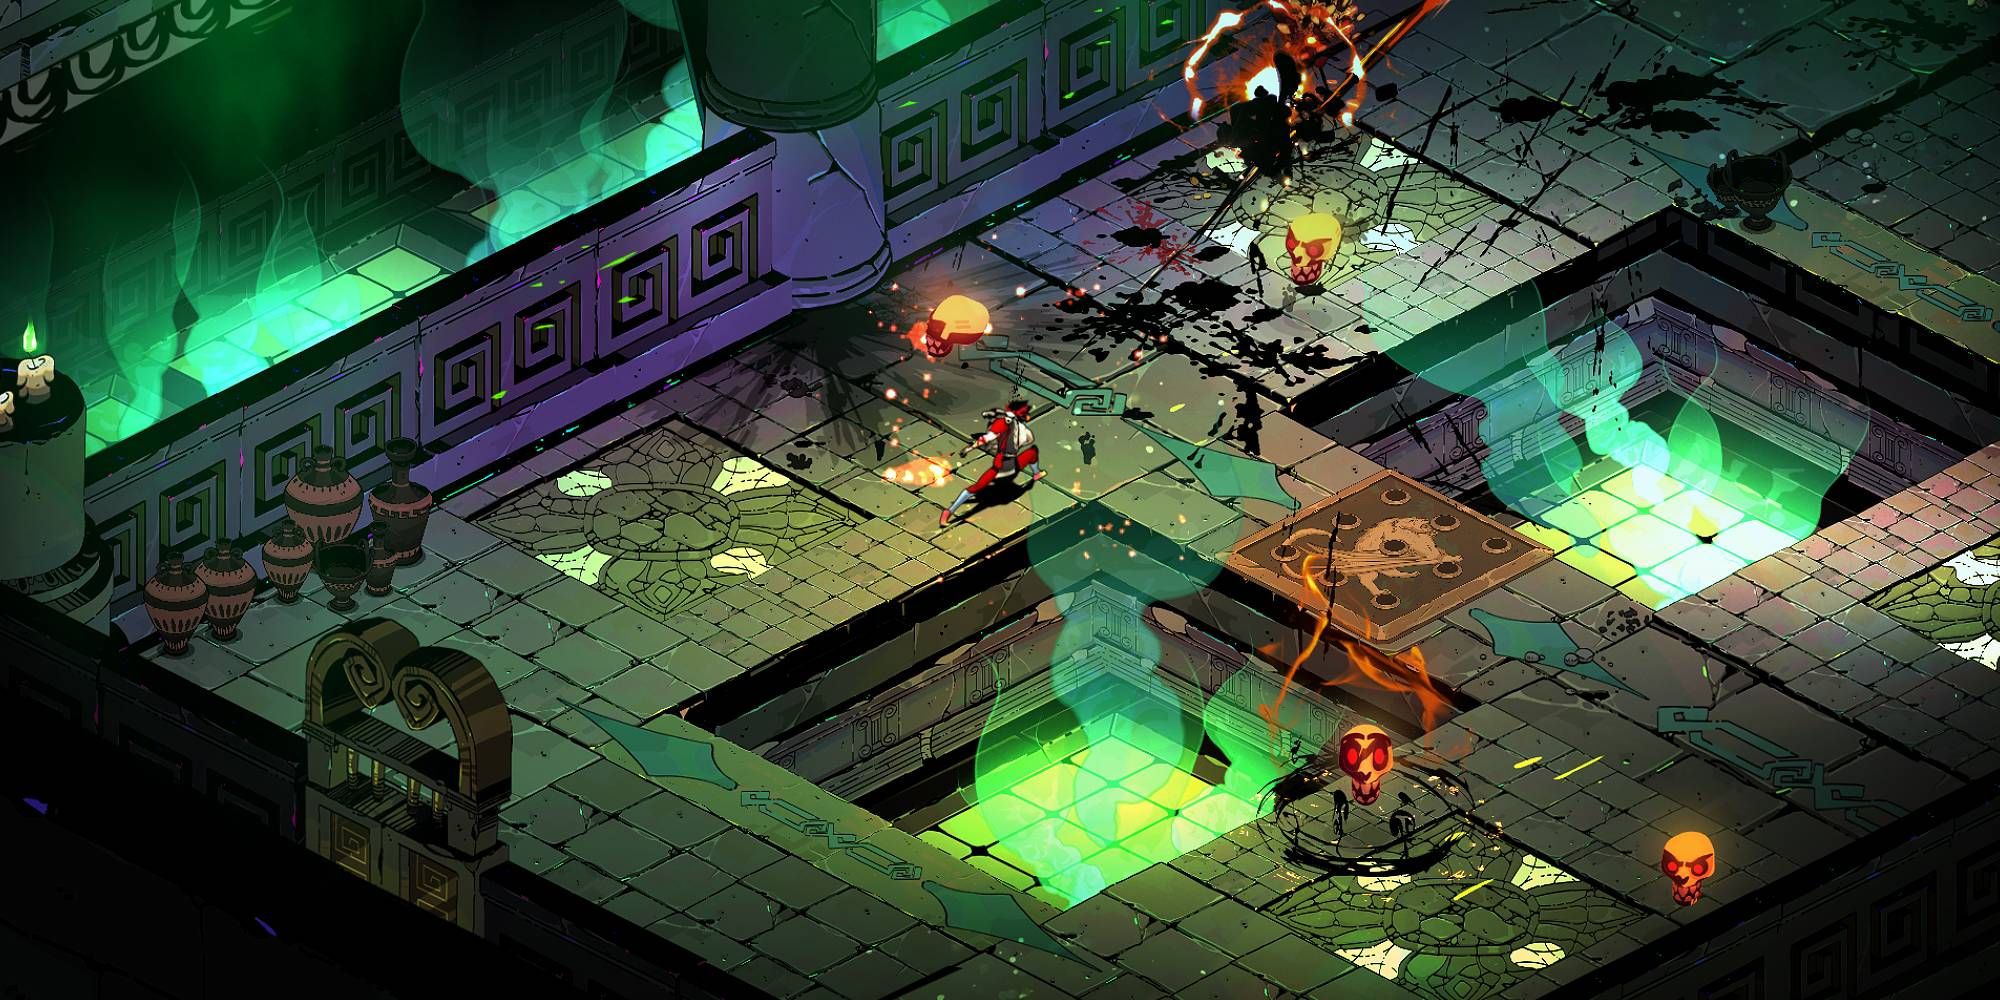 An isometric view of a crimson clad figure fighting floating skeletons in a stony room